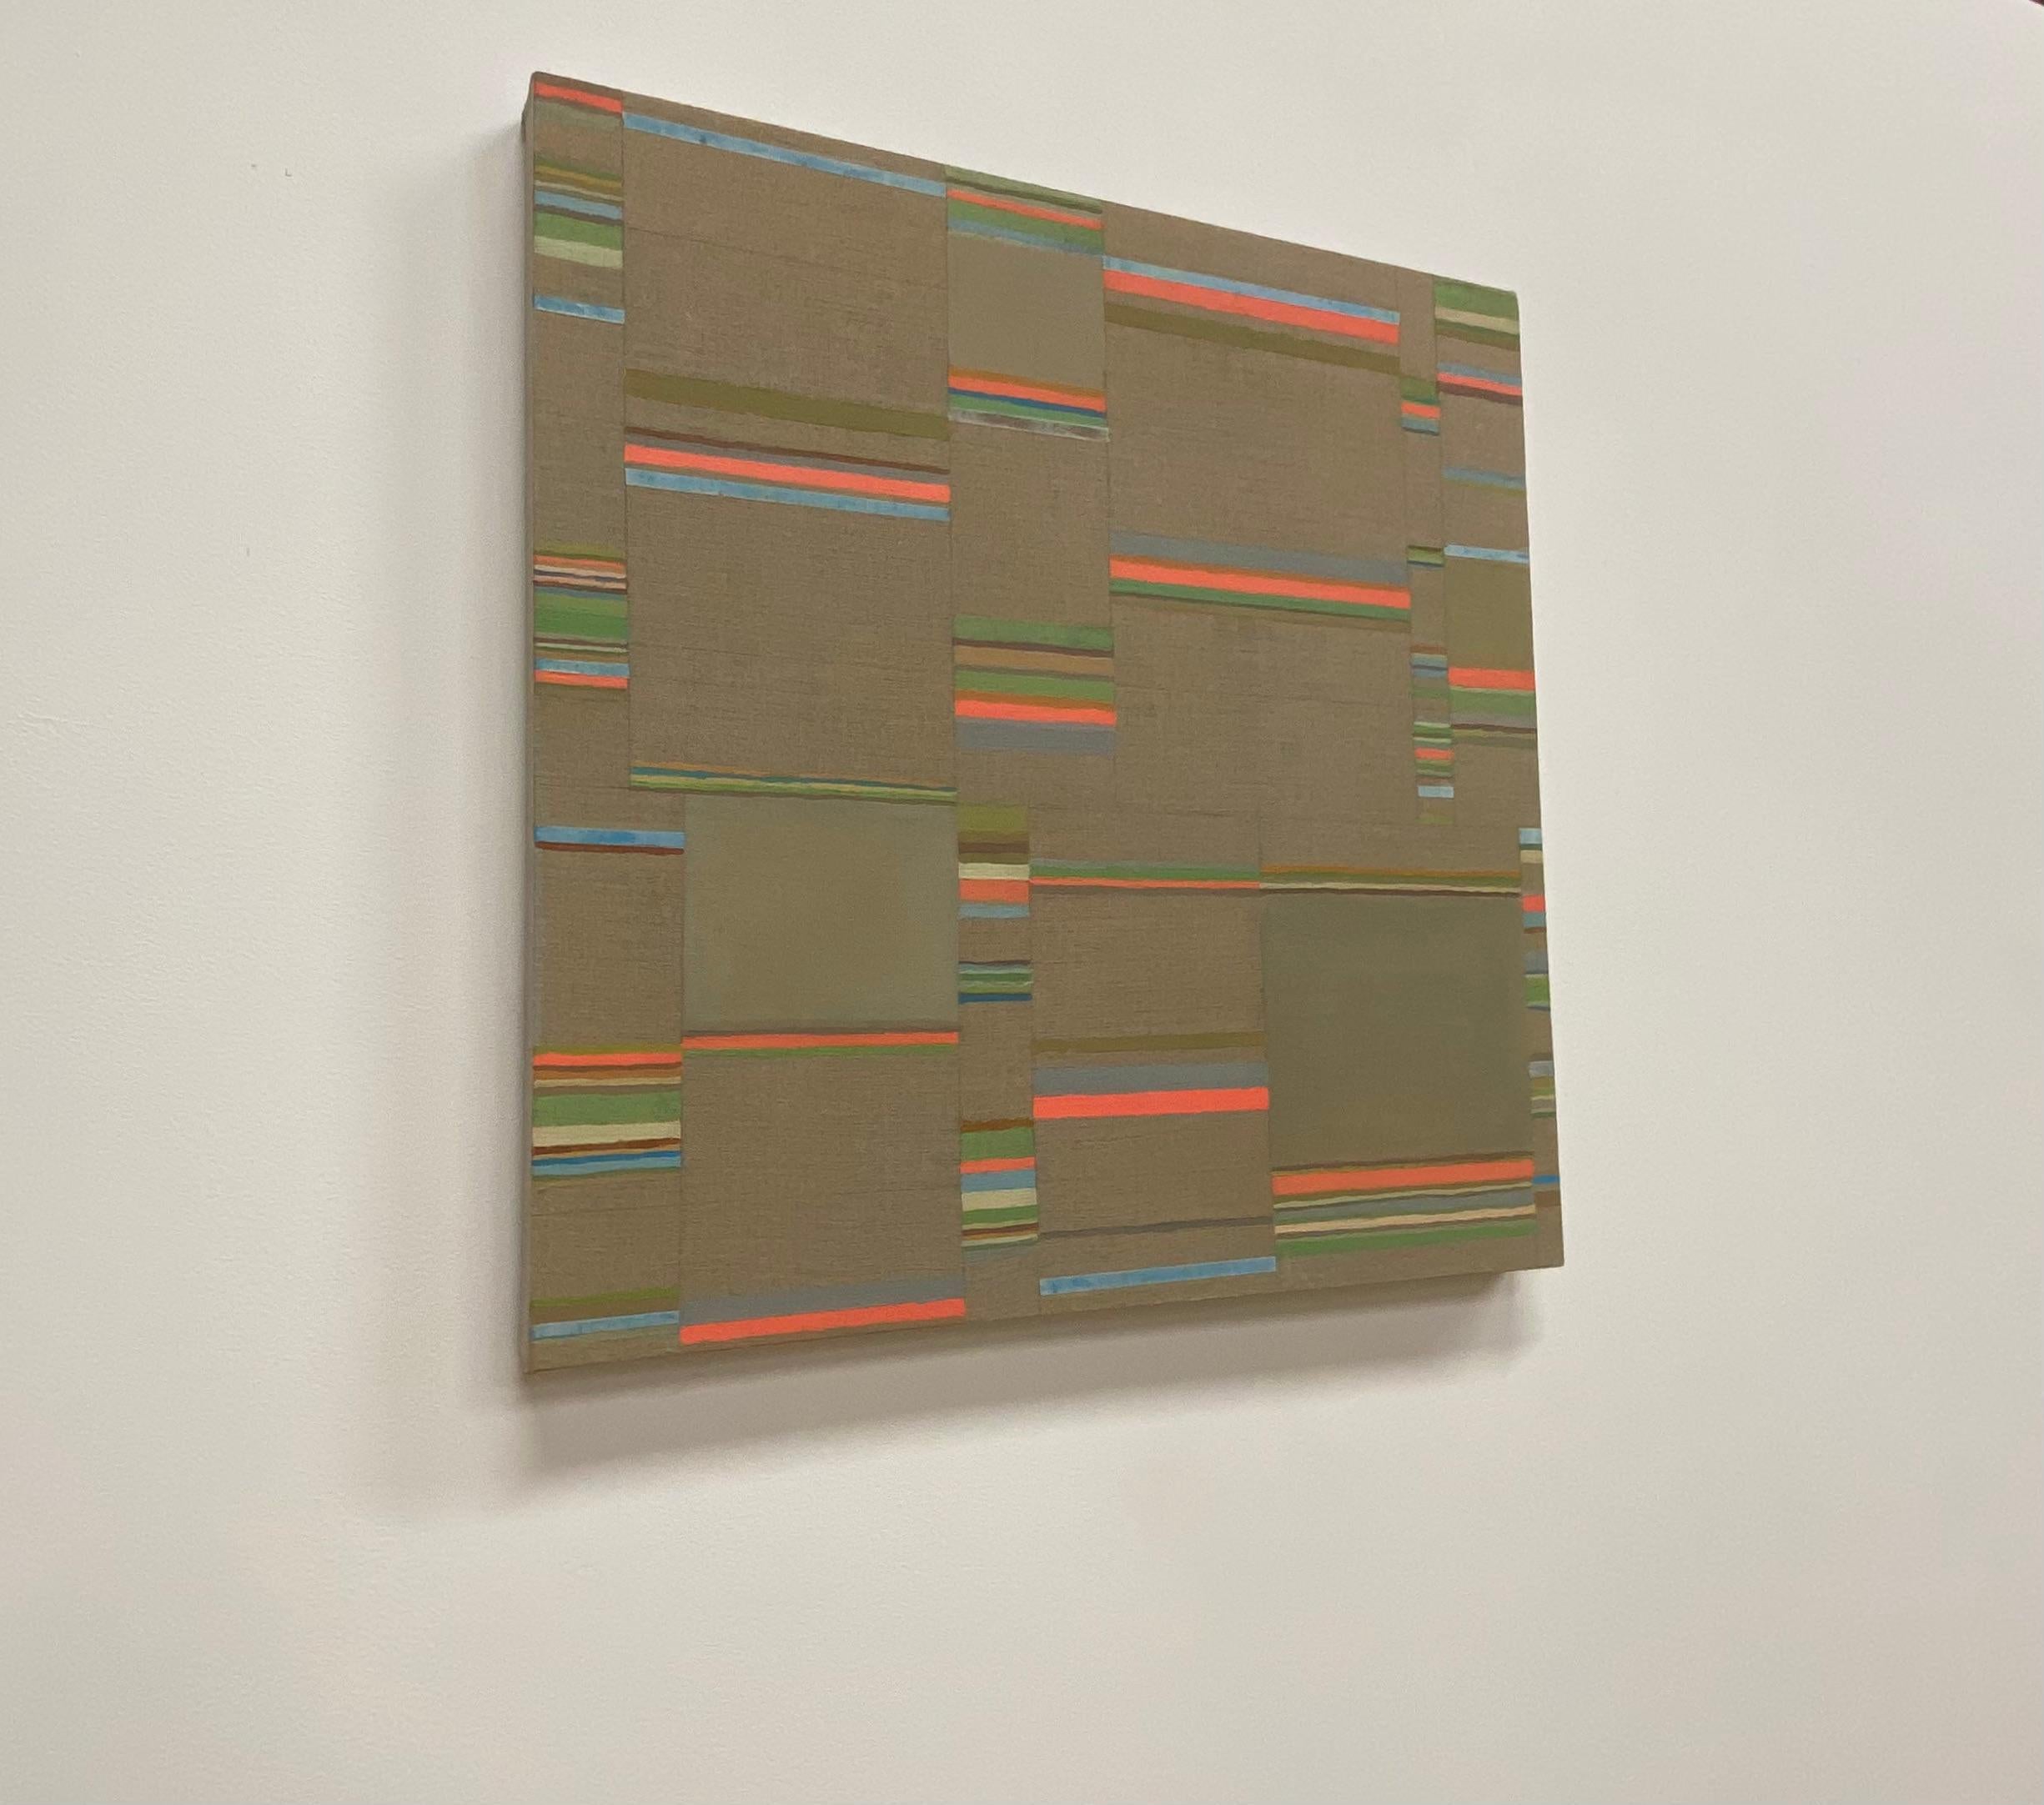 Green Umber Pink, Coral, Green, Brown, Olive, Teal Blue, Stripes - Contemporary Painting by Elizabeth Gourlay